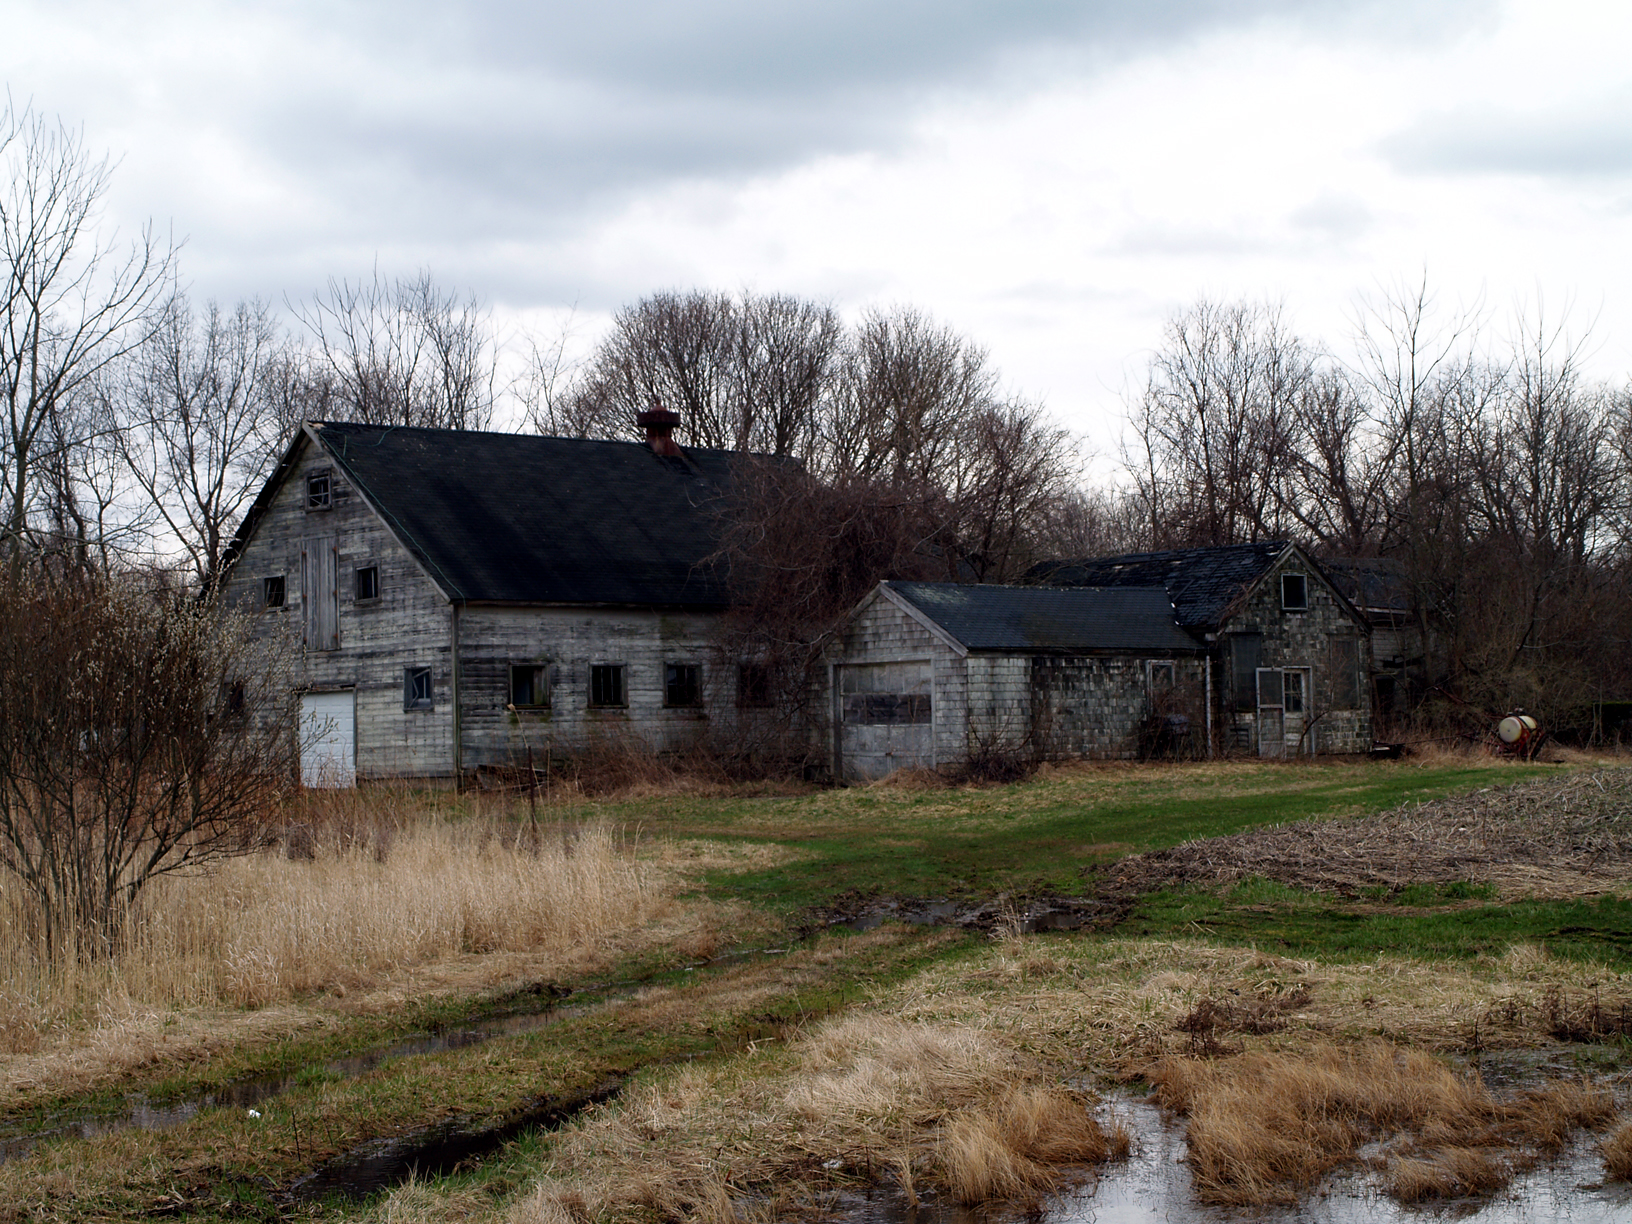 an old abandoned house in a rural area